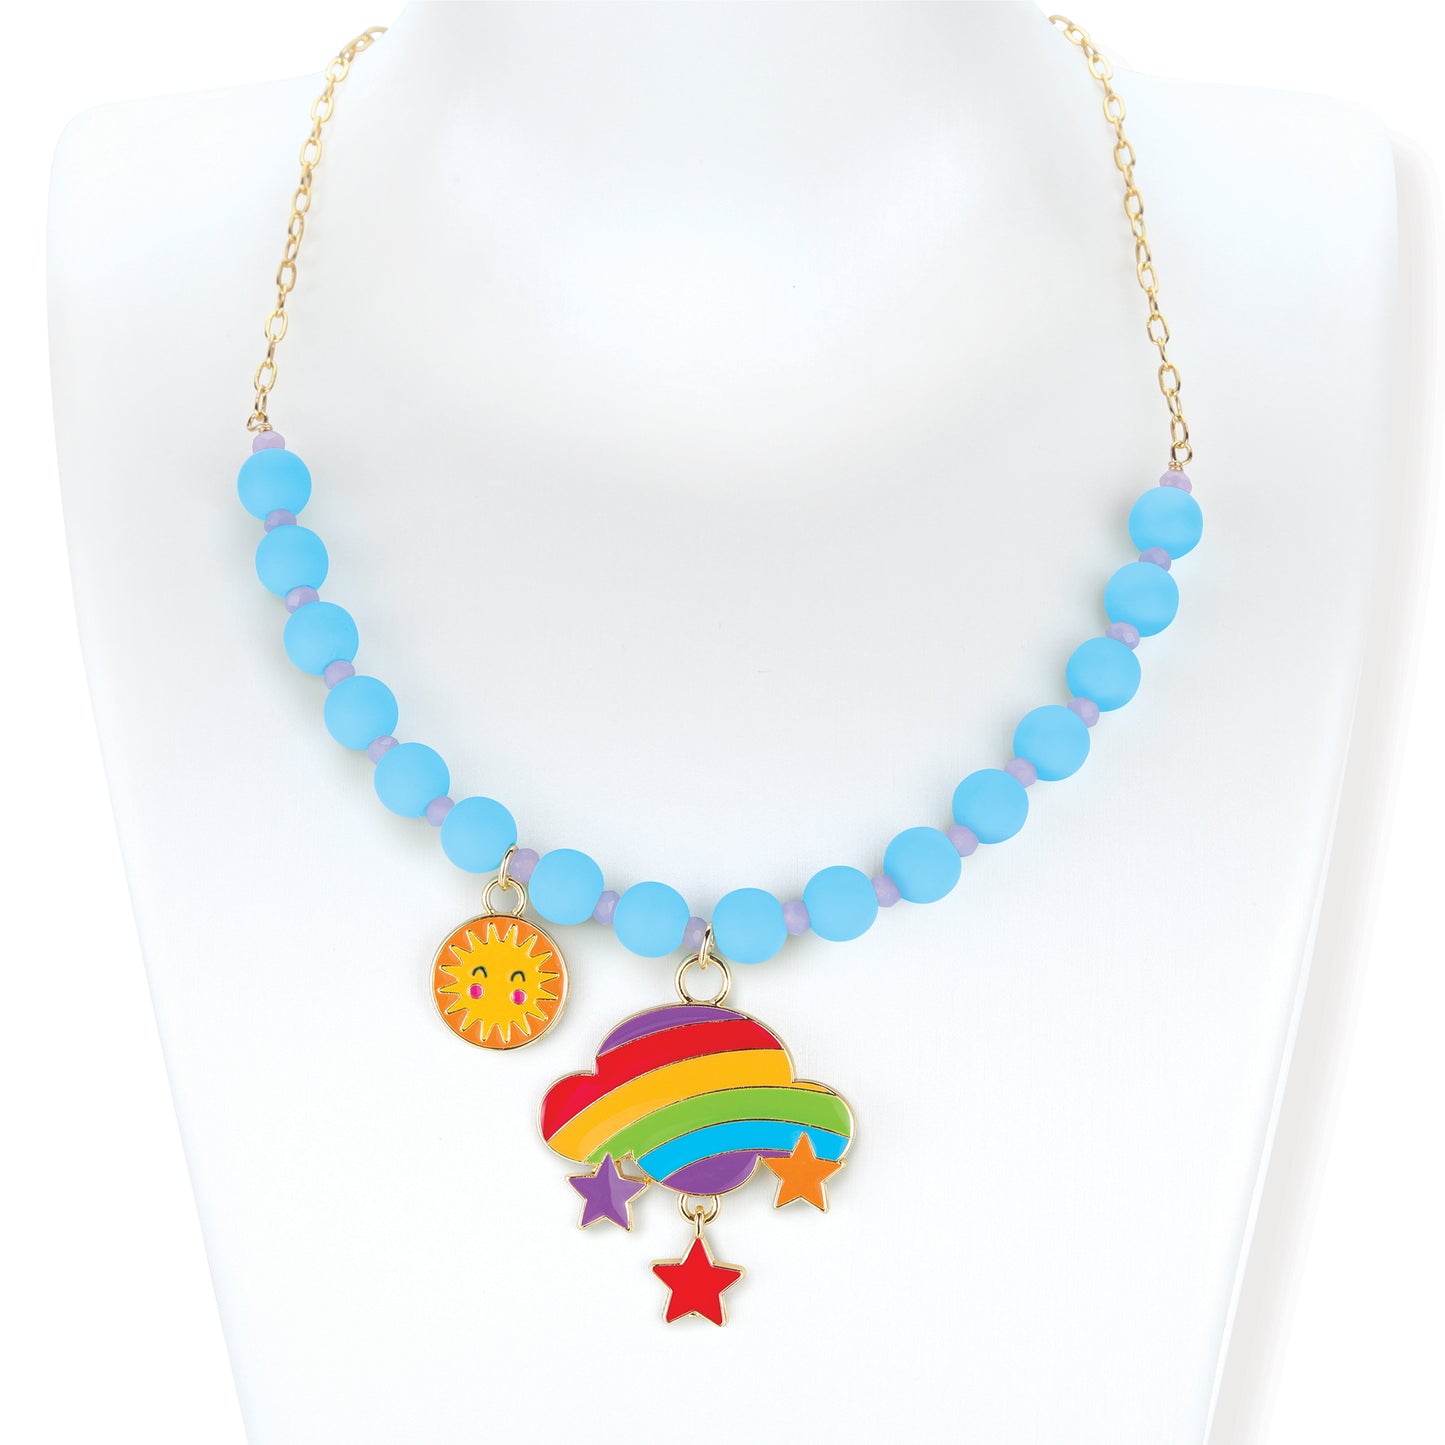 Beads and Baubles Rainbow Cloud Necklace